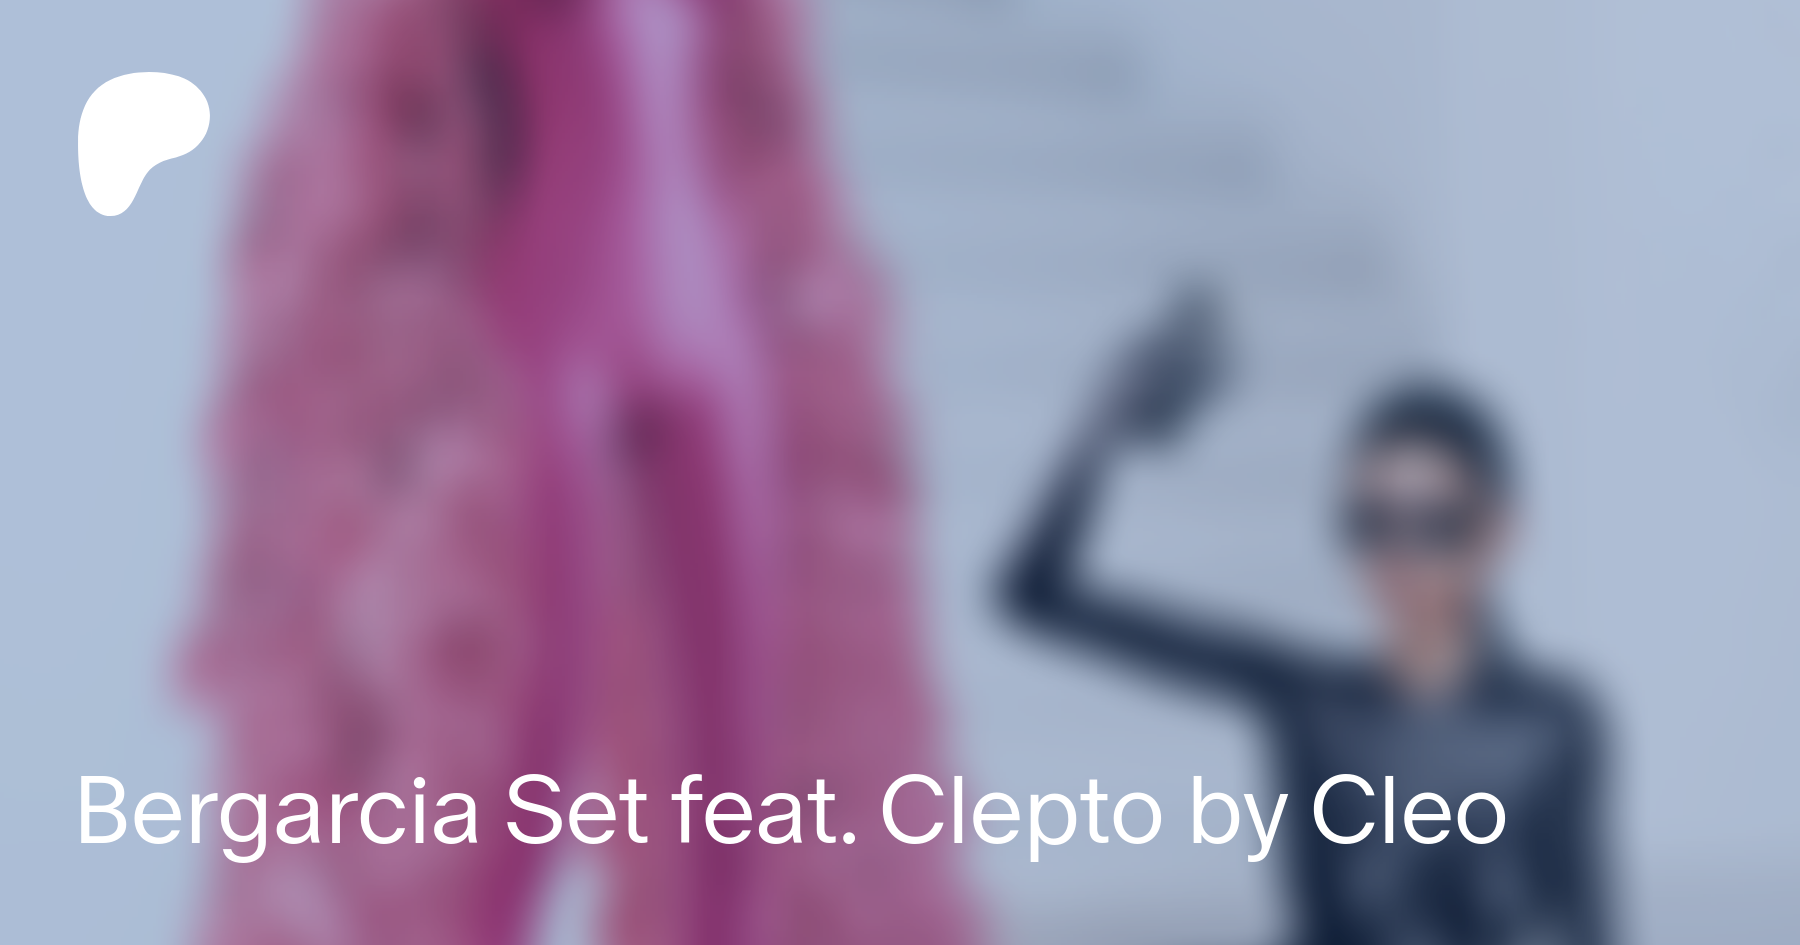 Bergarcia Set feat. Clepto by Cleo by bergdorfsims from Patreon